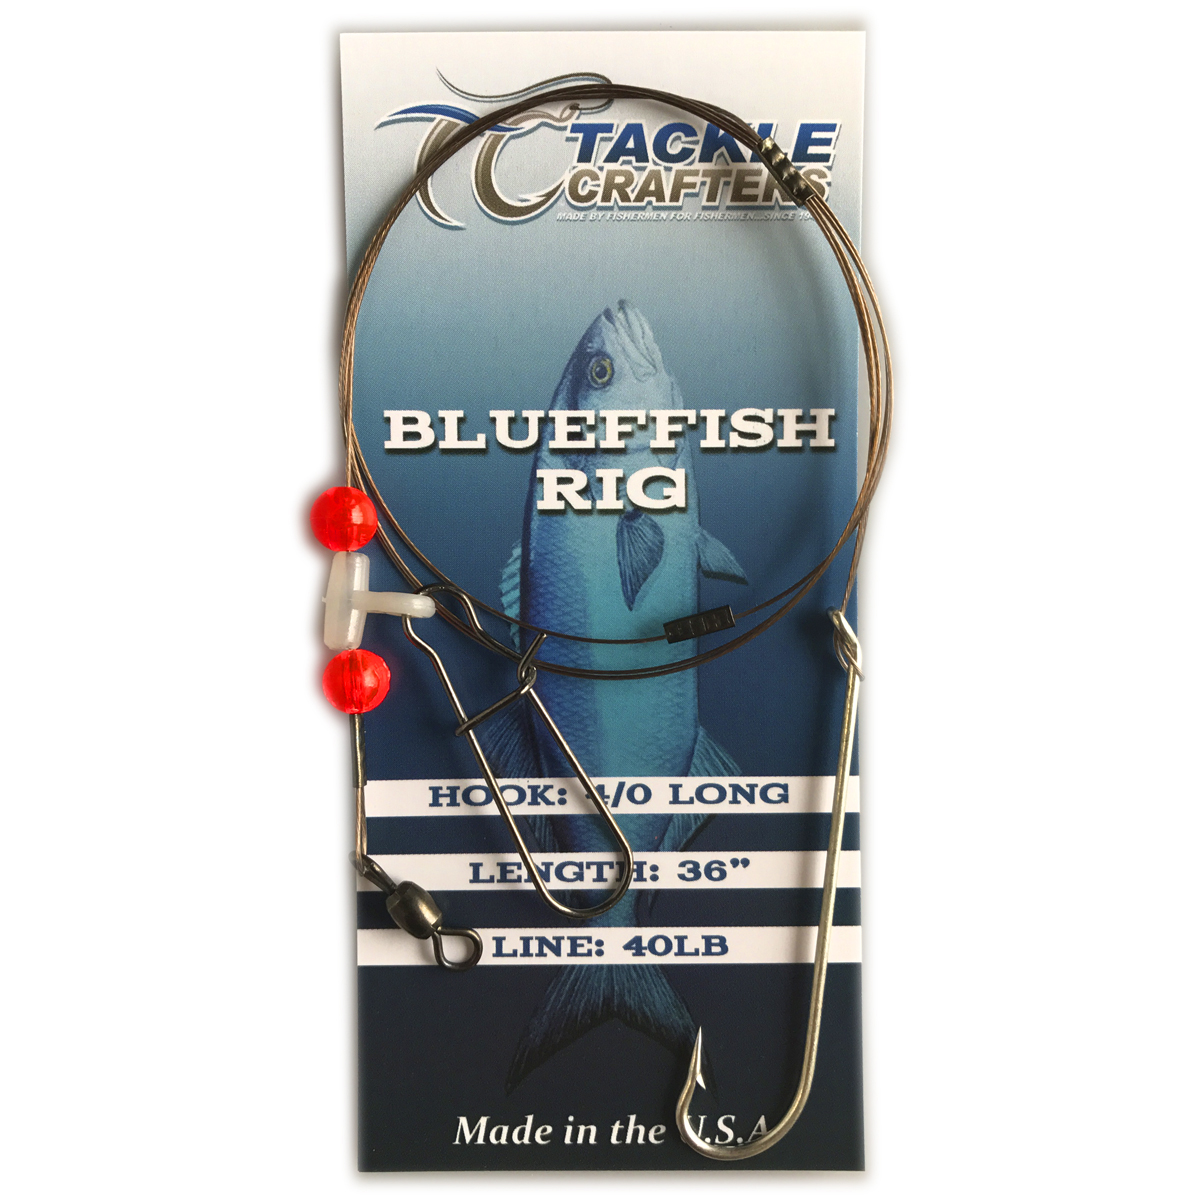 Bluefish Rig  Tackle Crafters